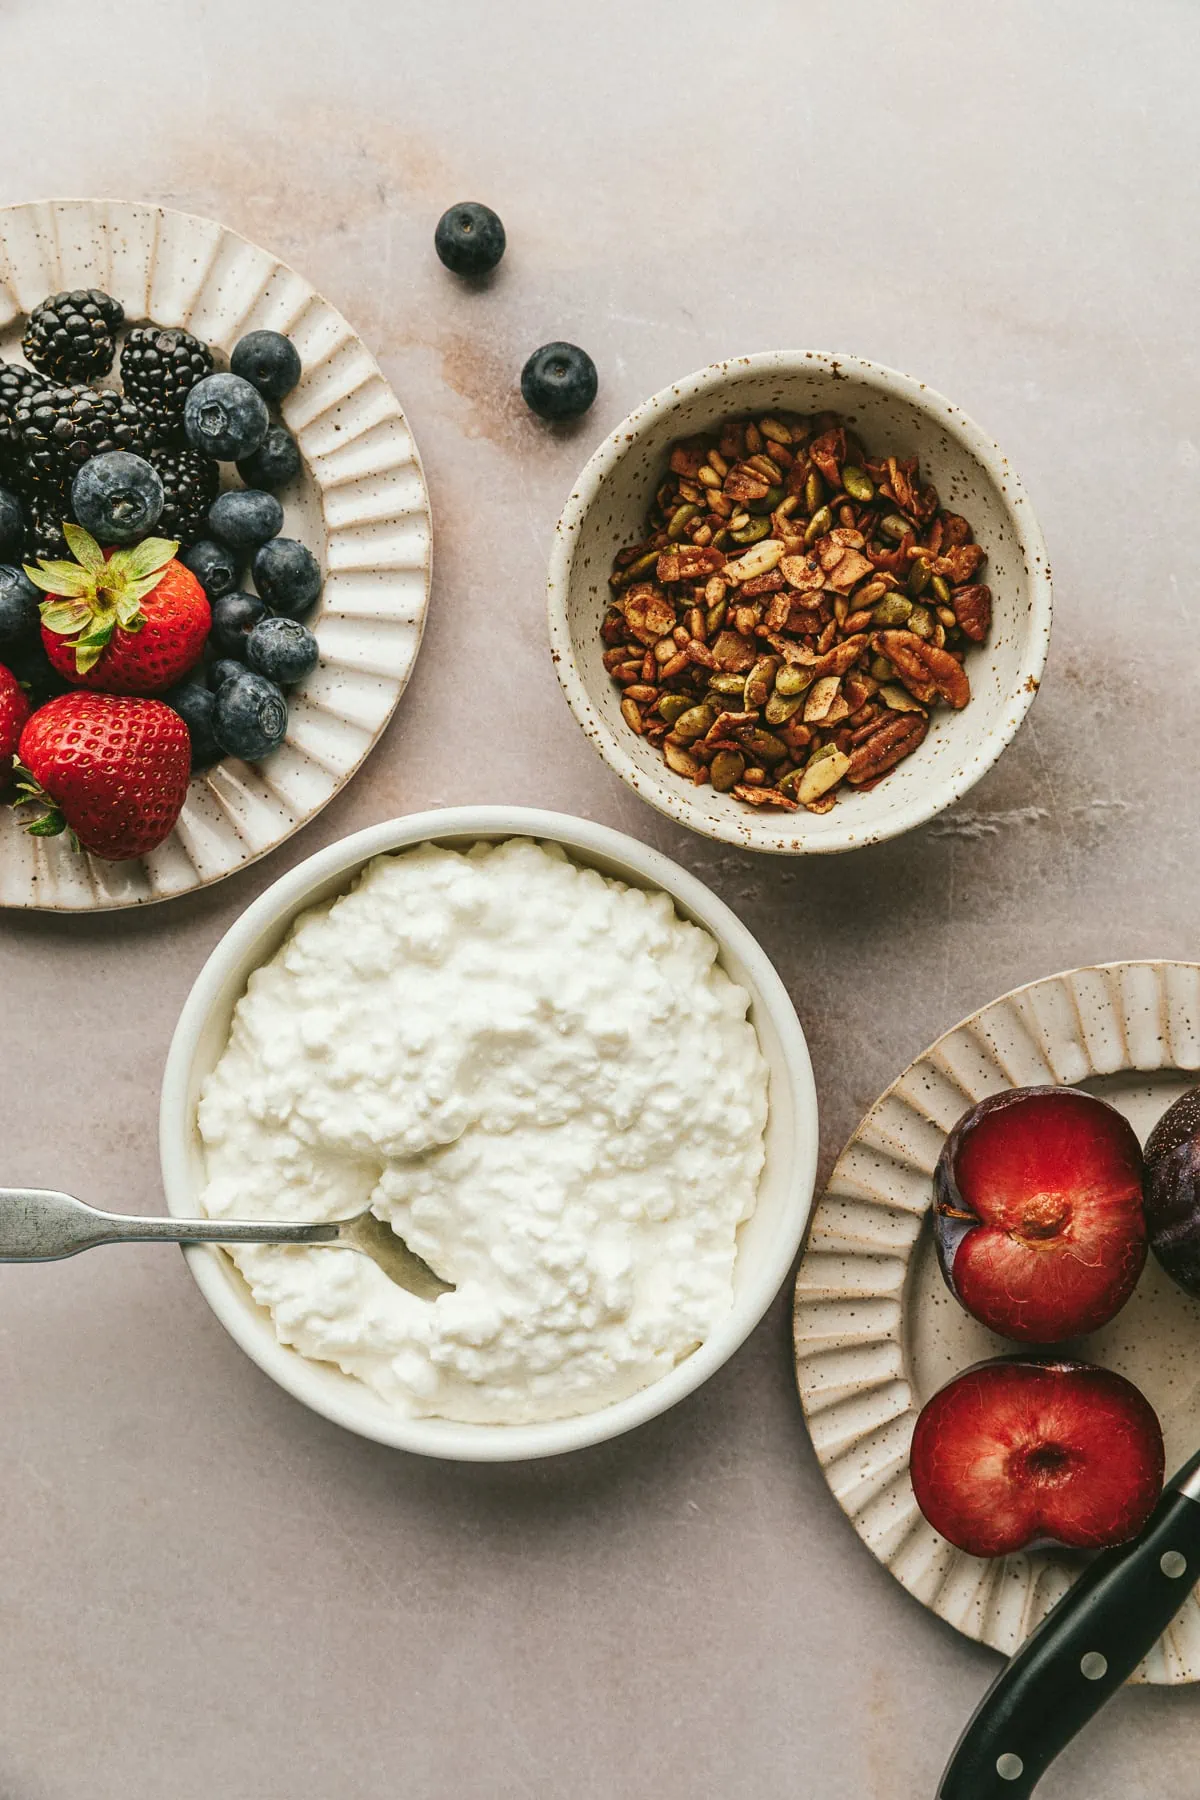 Ingredients for cottage cheese with fruit on a marble surface.